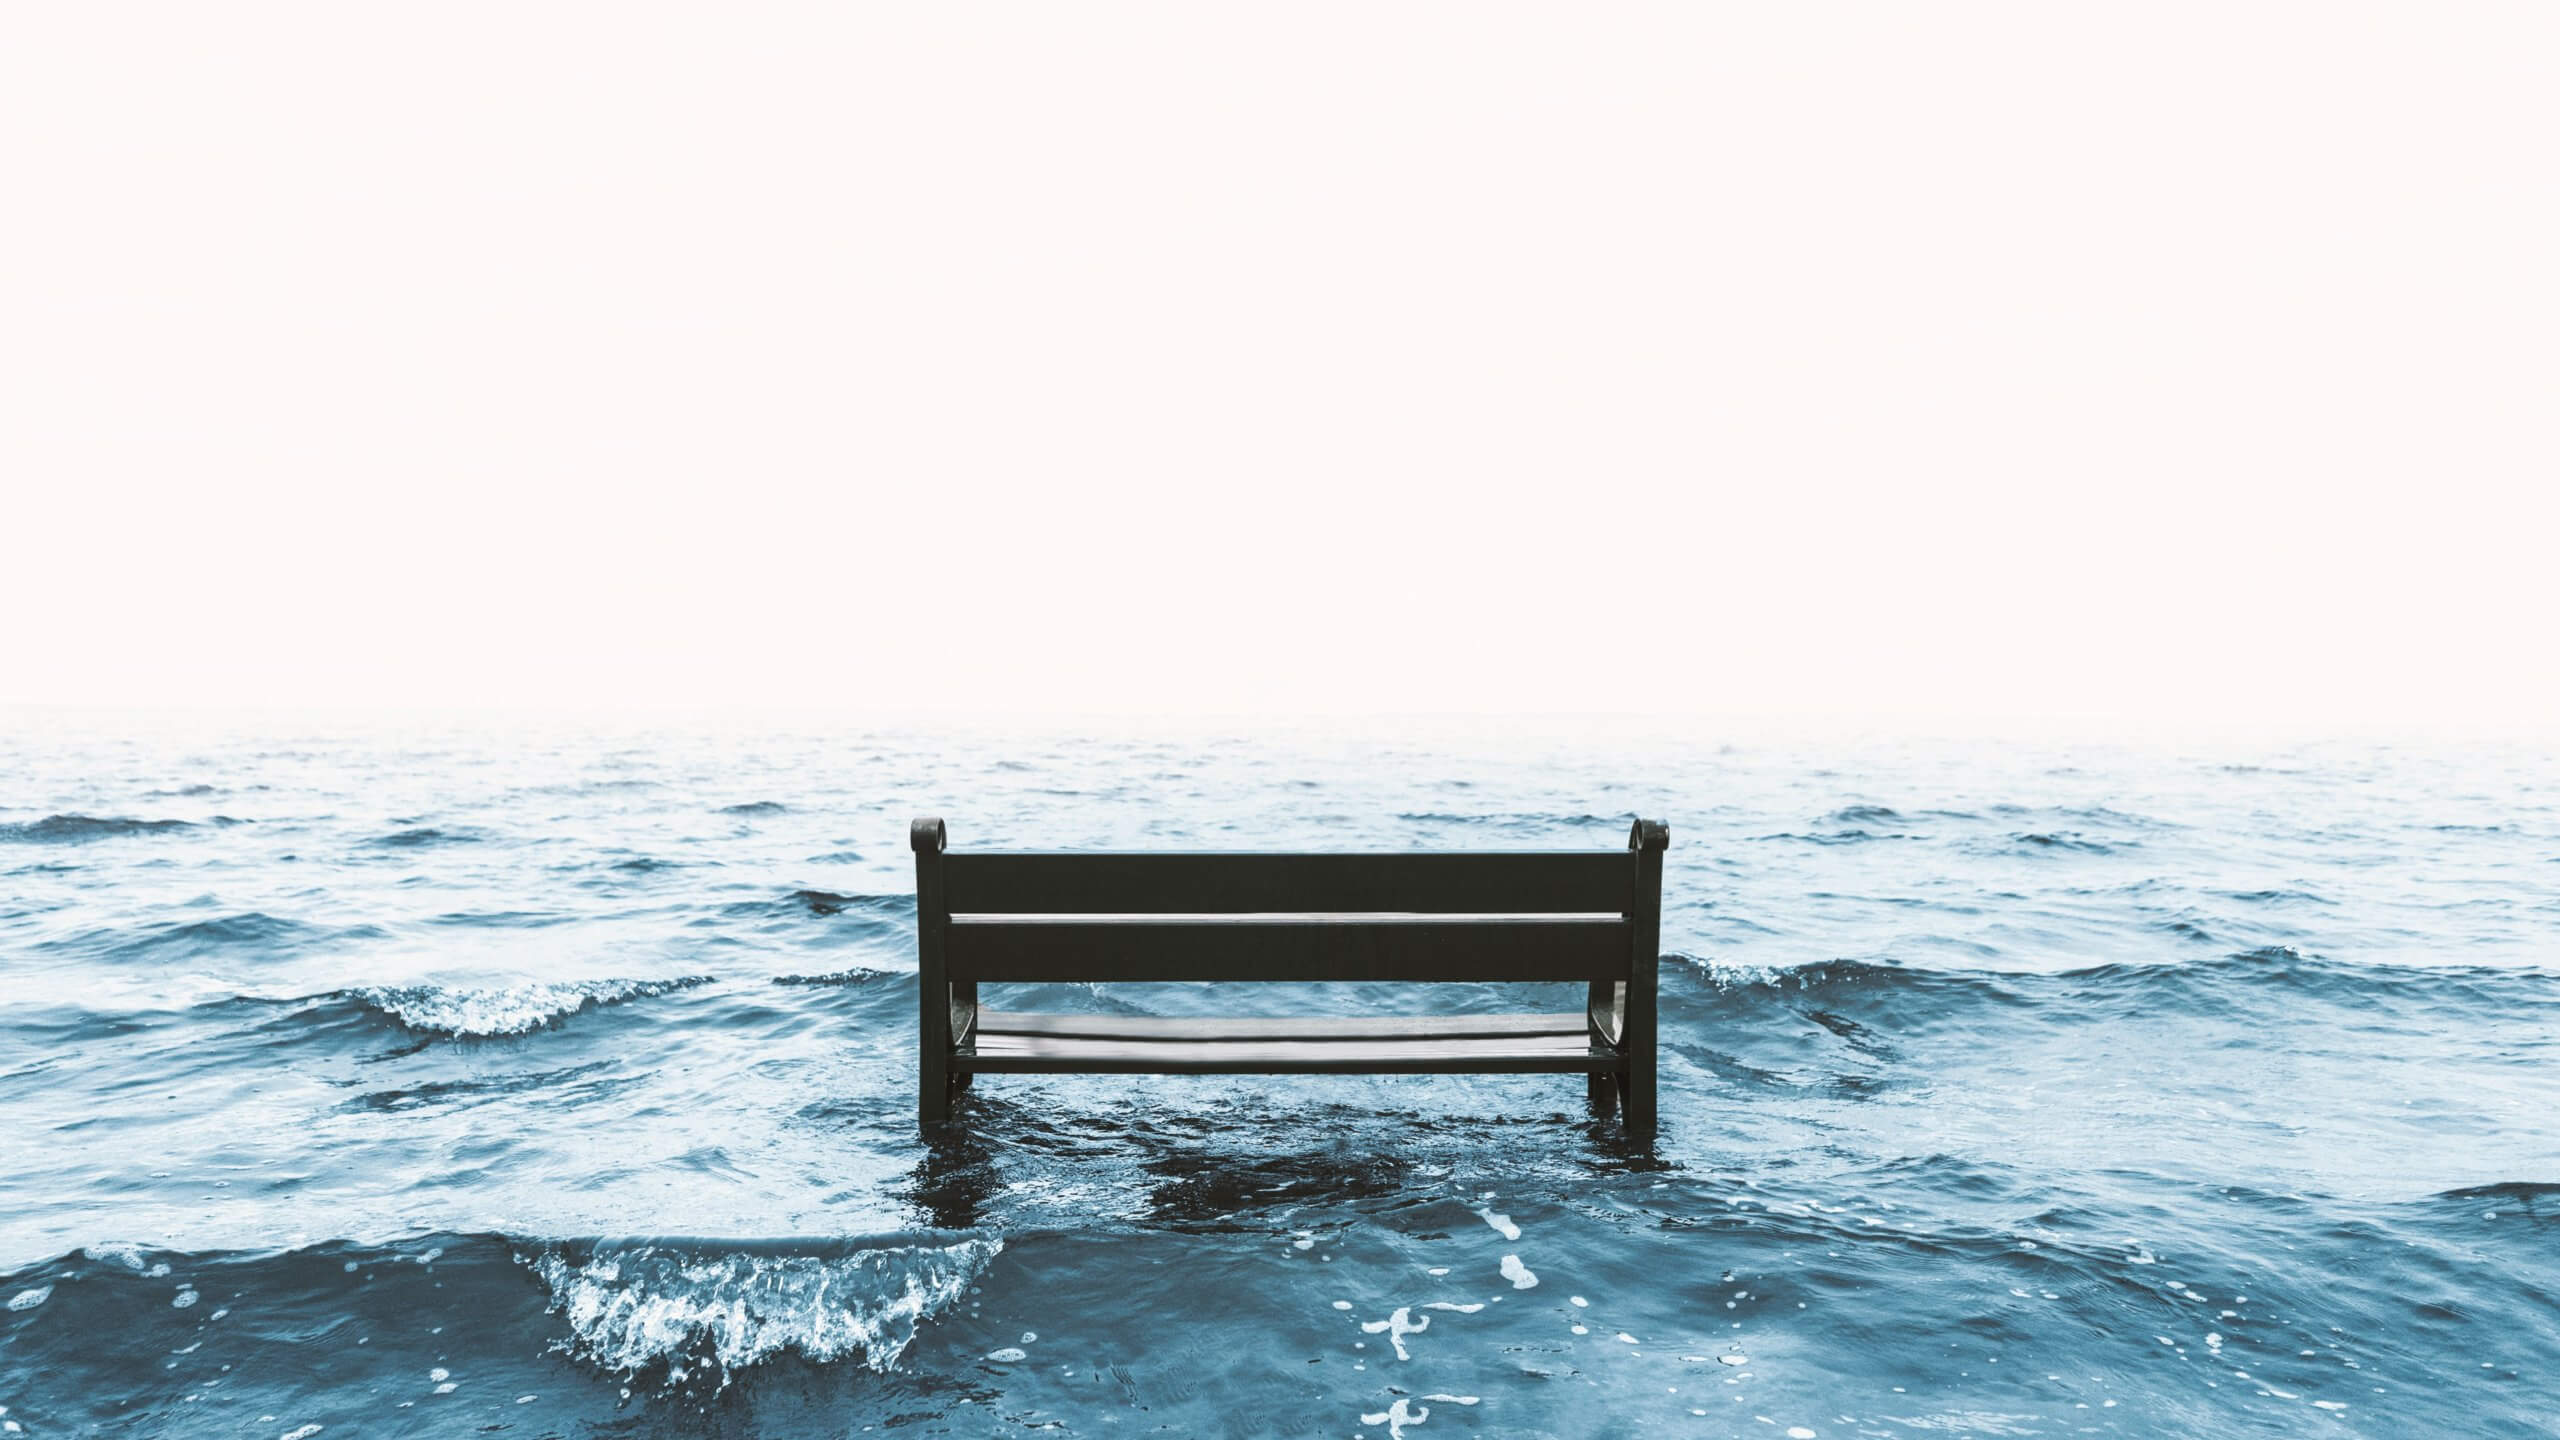 black table on body of water